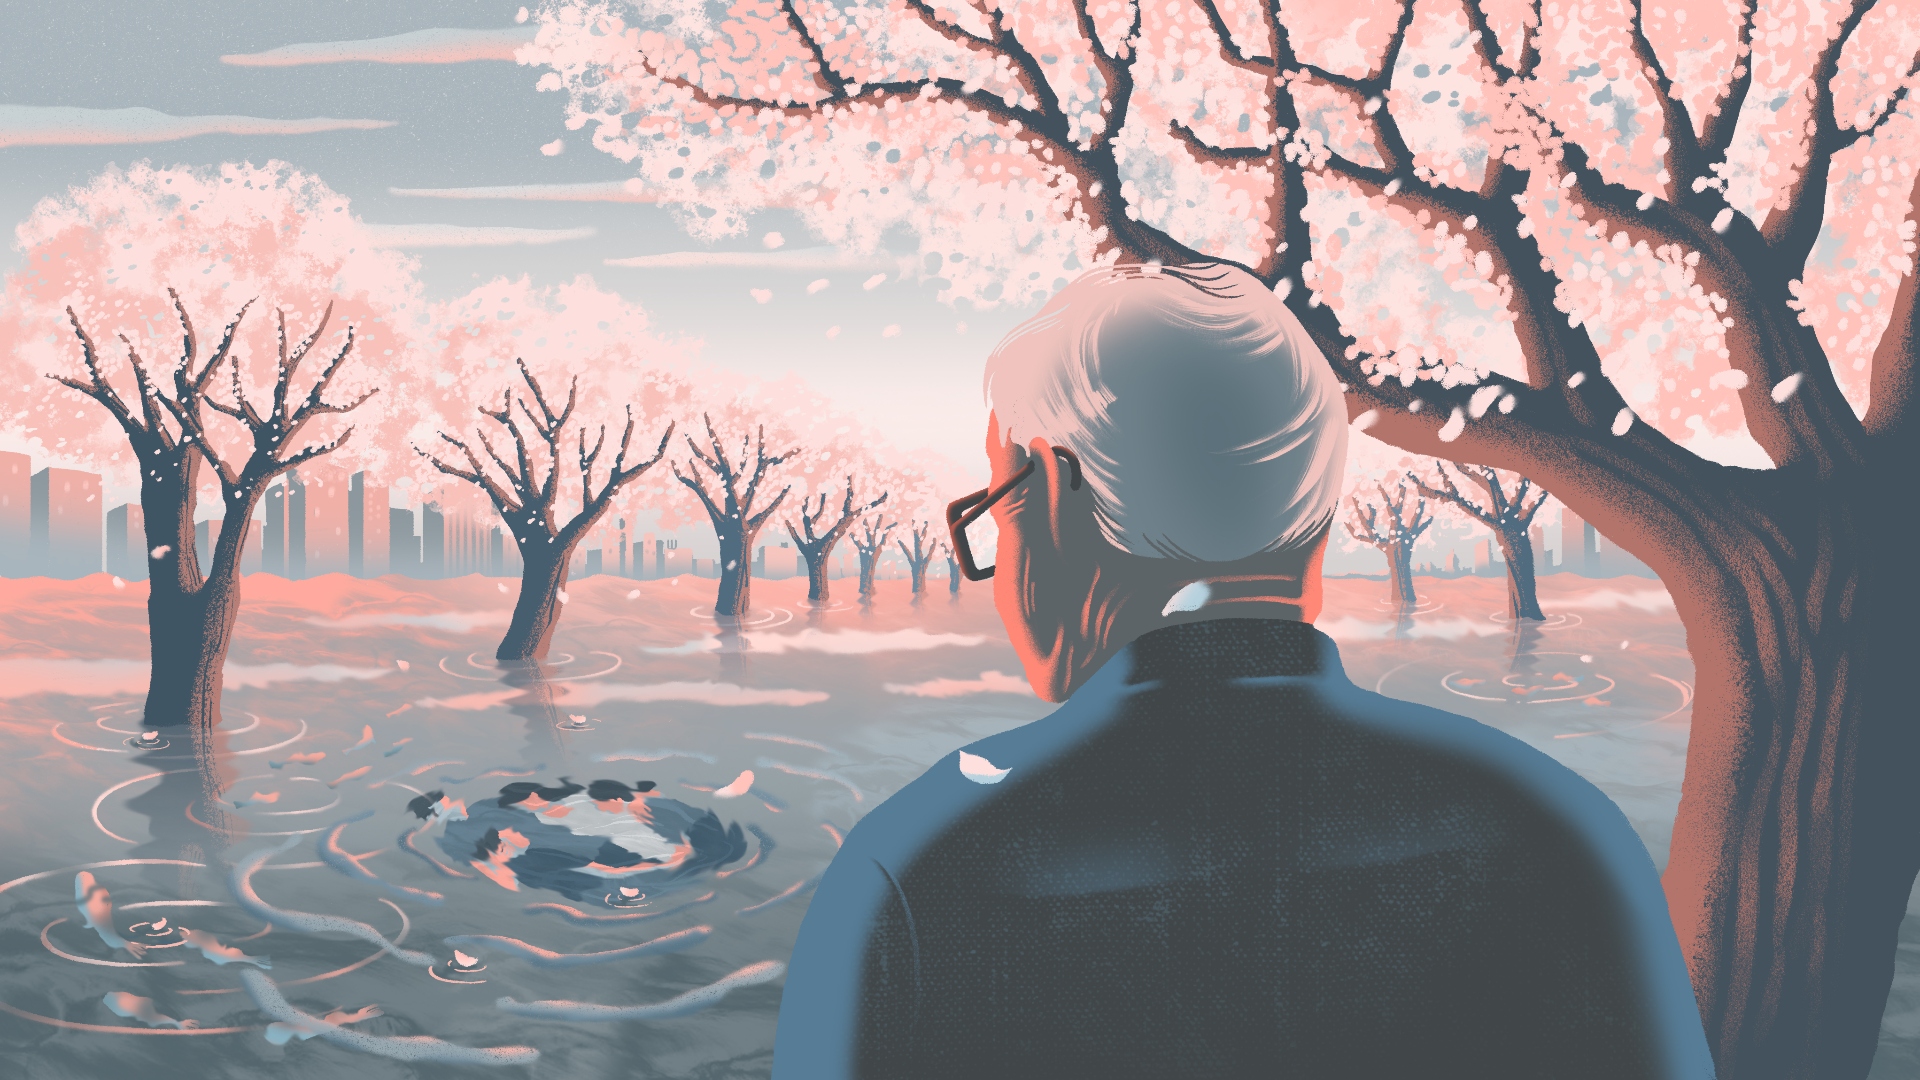 Illustration of an old man looking out at a flooded almond farm with pink almond blossoms falling around him. In the floodwaters a vision of a family is visible